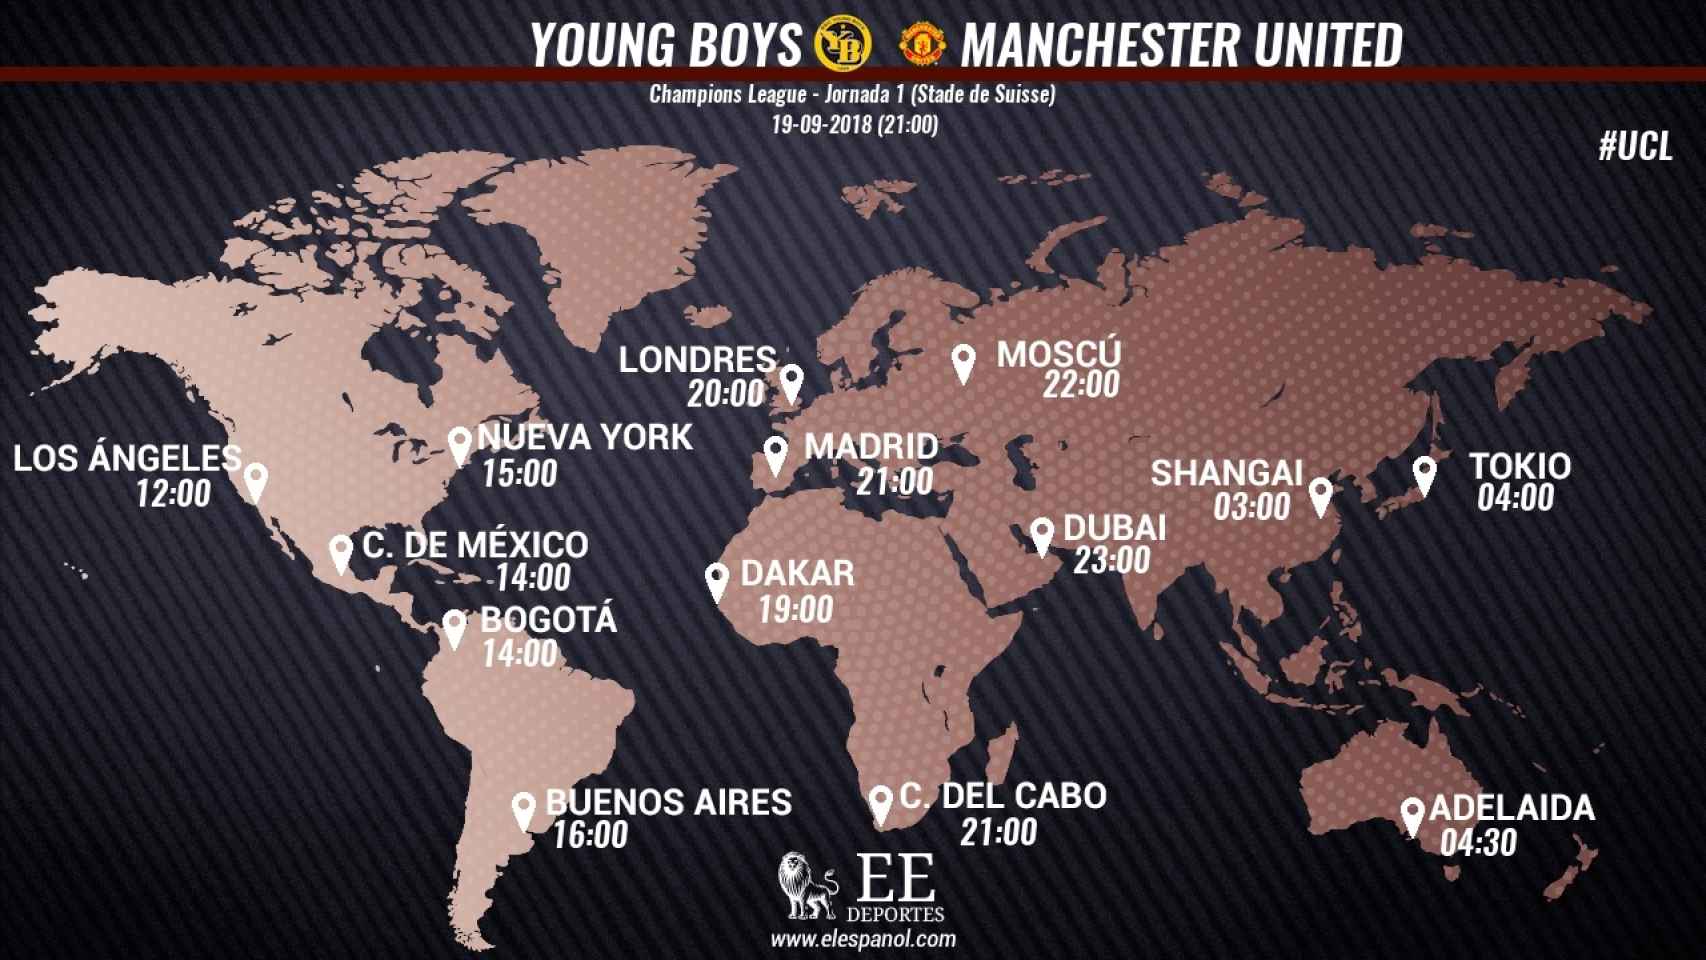 Horario del Young Boys - Manchester United